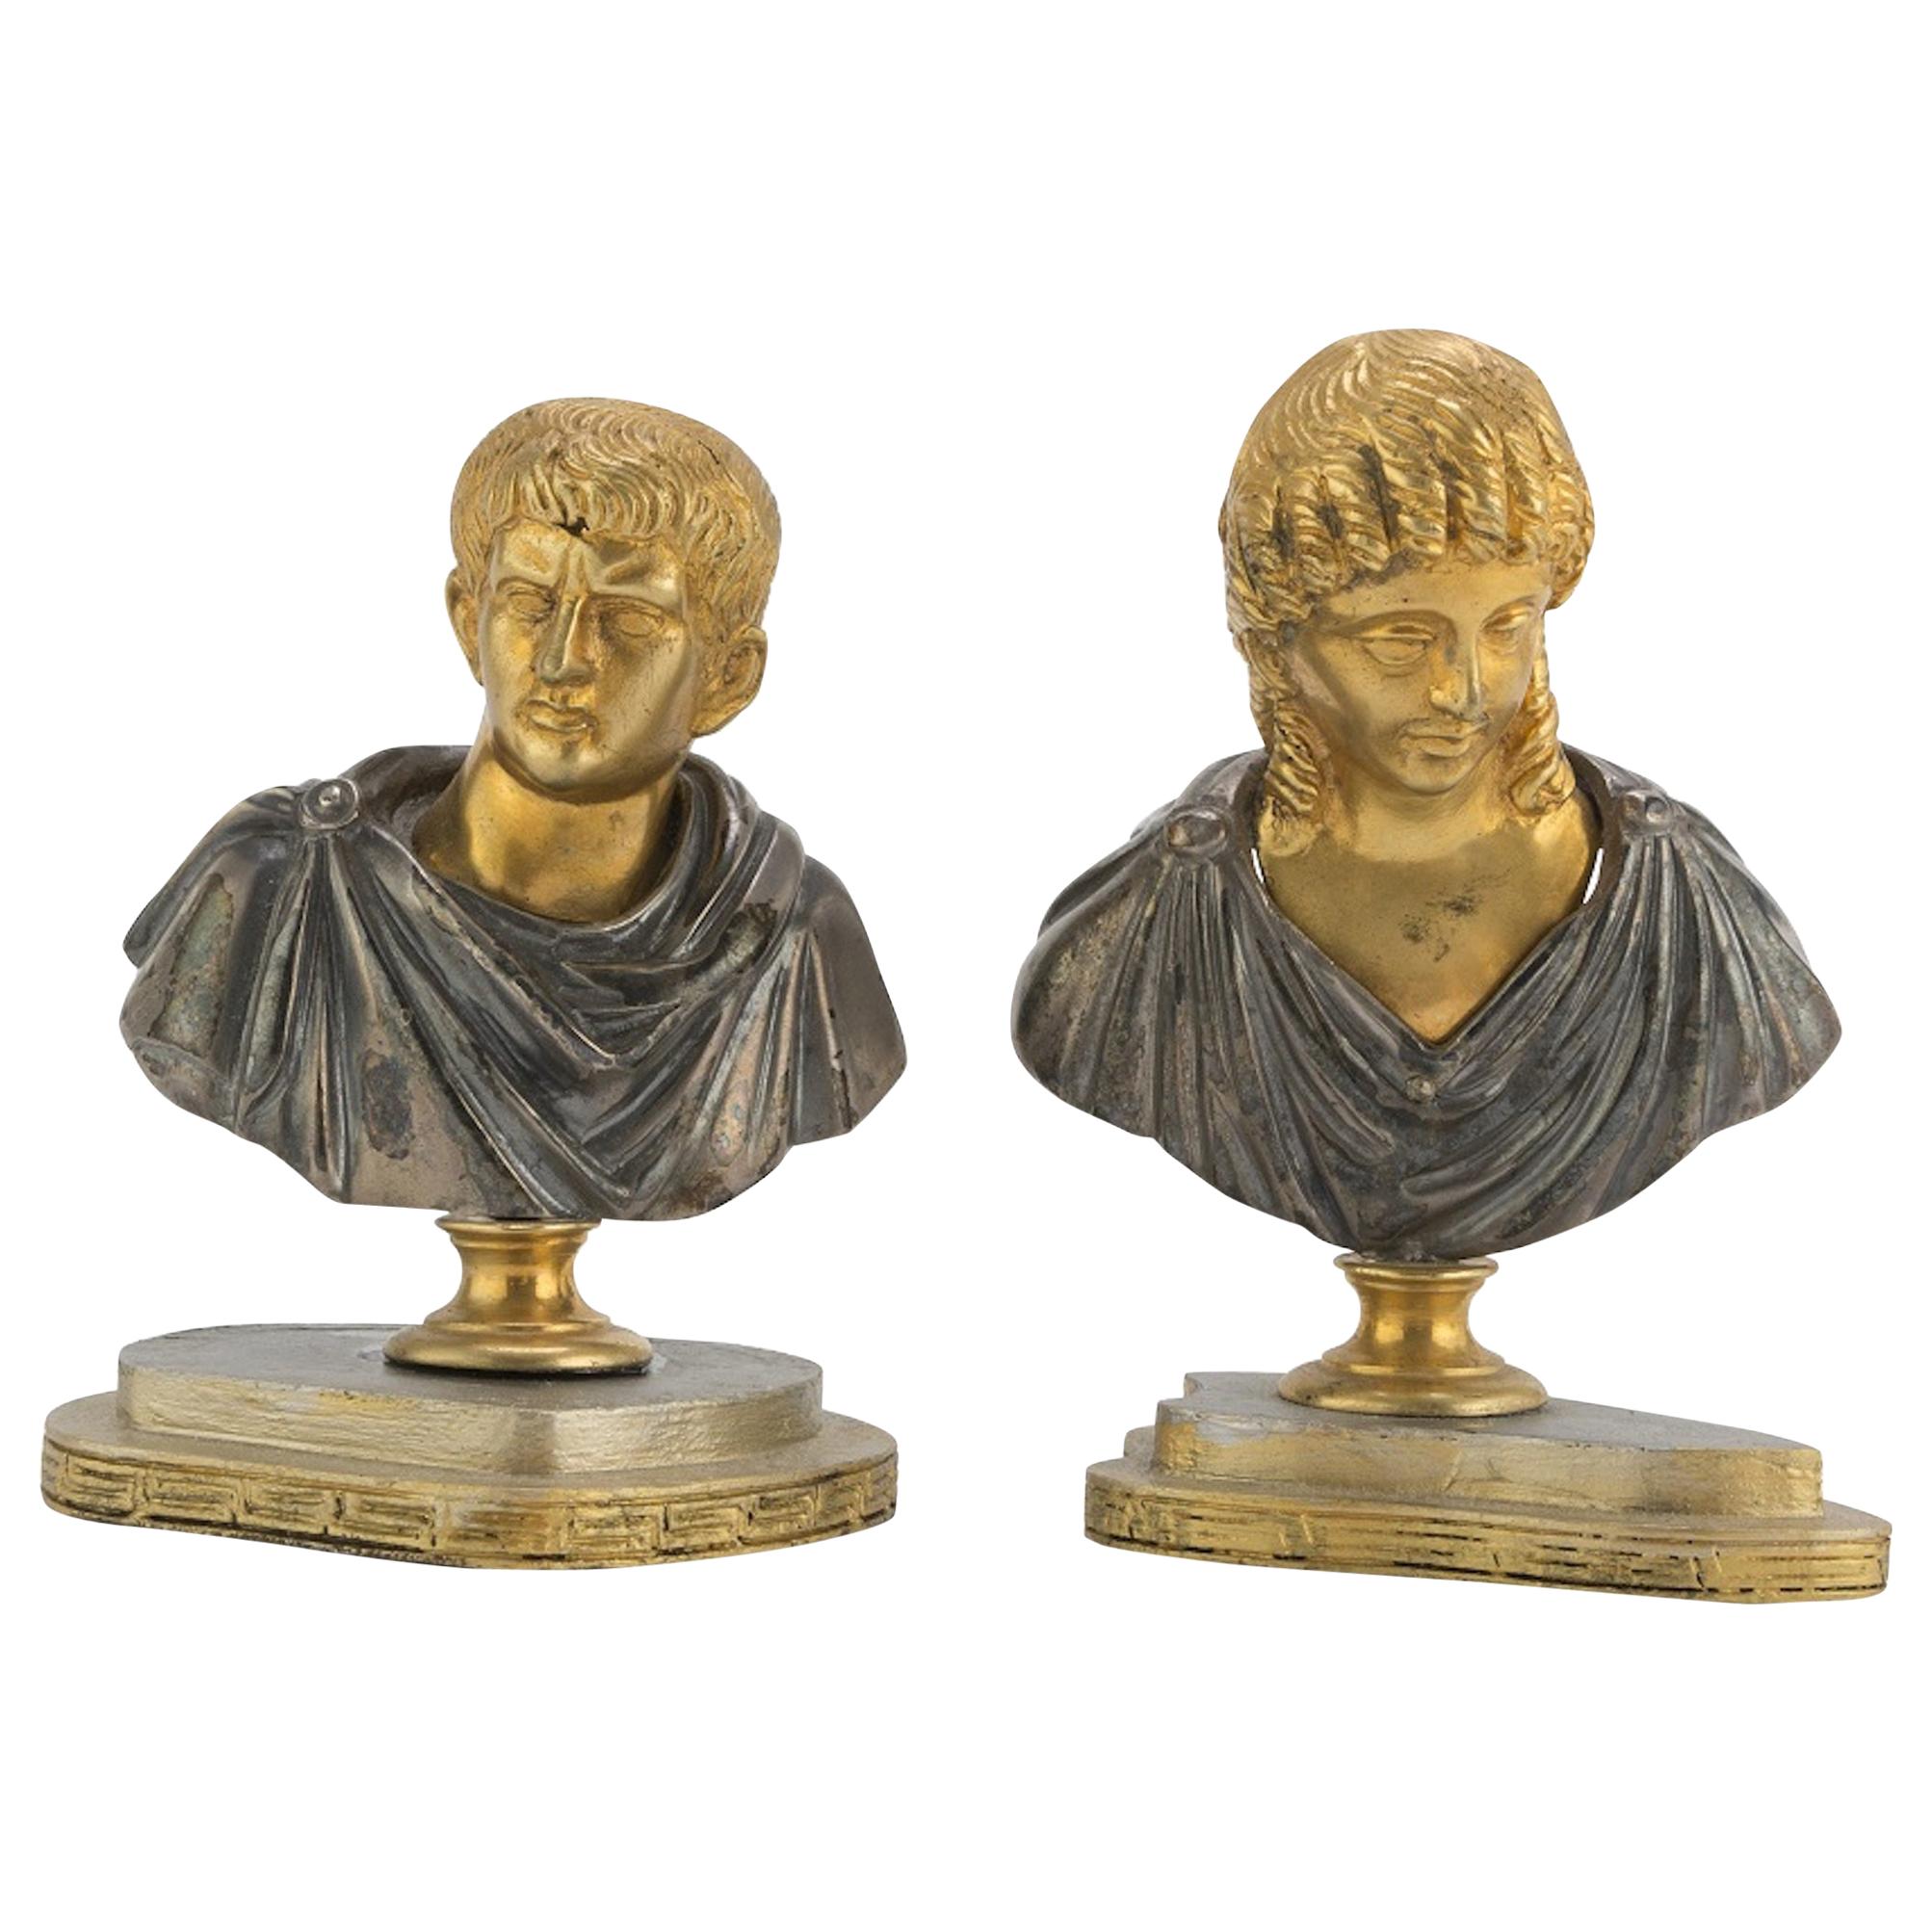 Pair of Bronze Busts by Anonymous Italian School, 19th Century